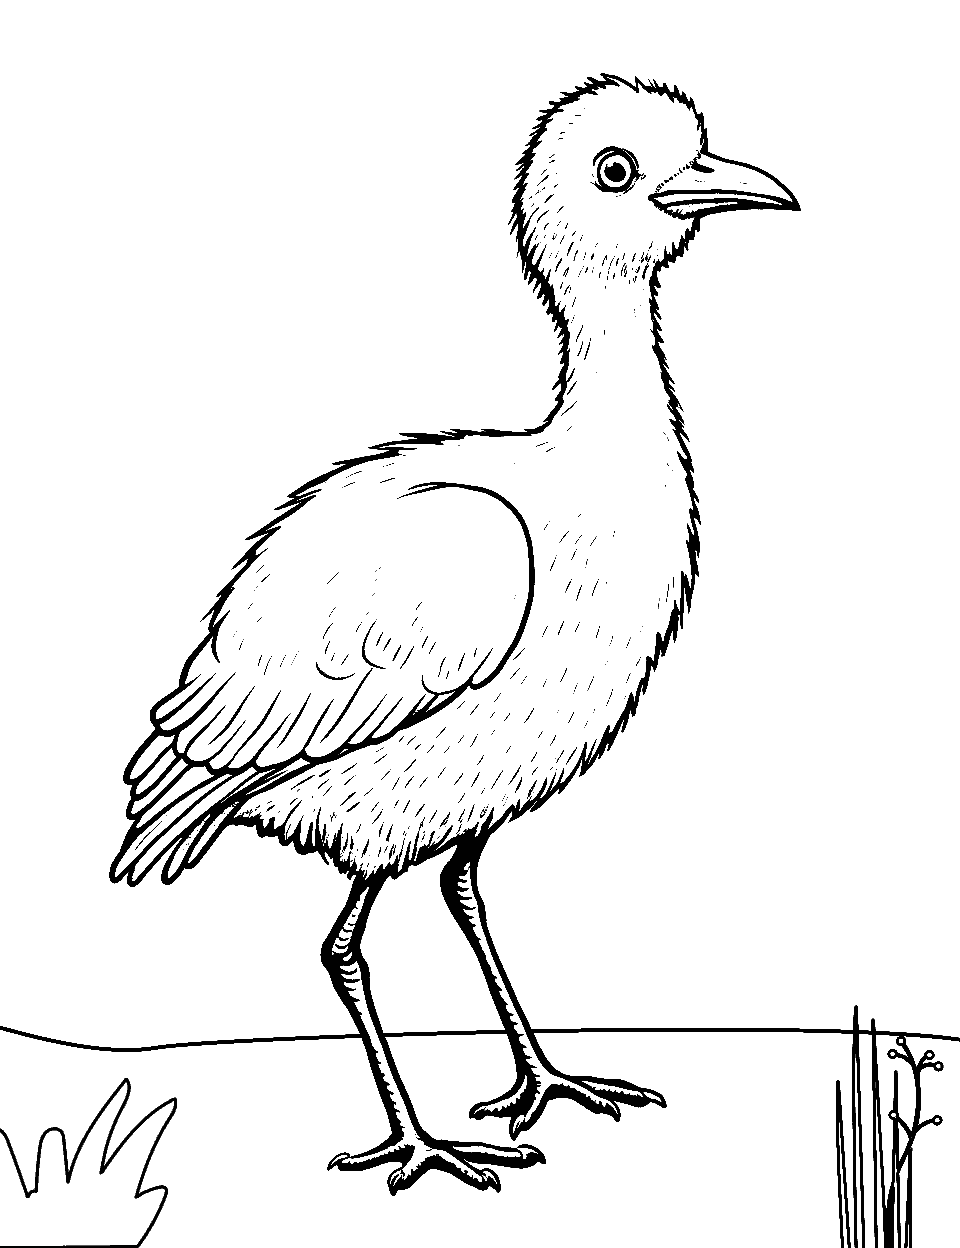 Baby Ostrich's Stride Coloring Page - A baby ostrich with newborn feathers, learning to walk.